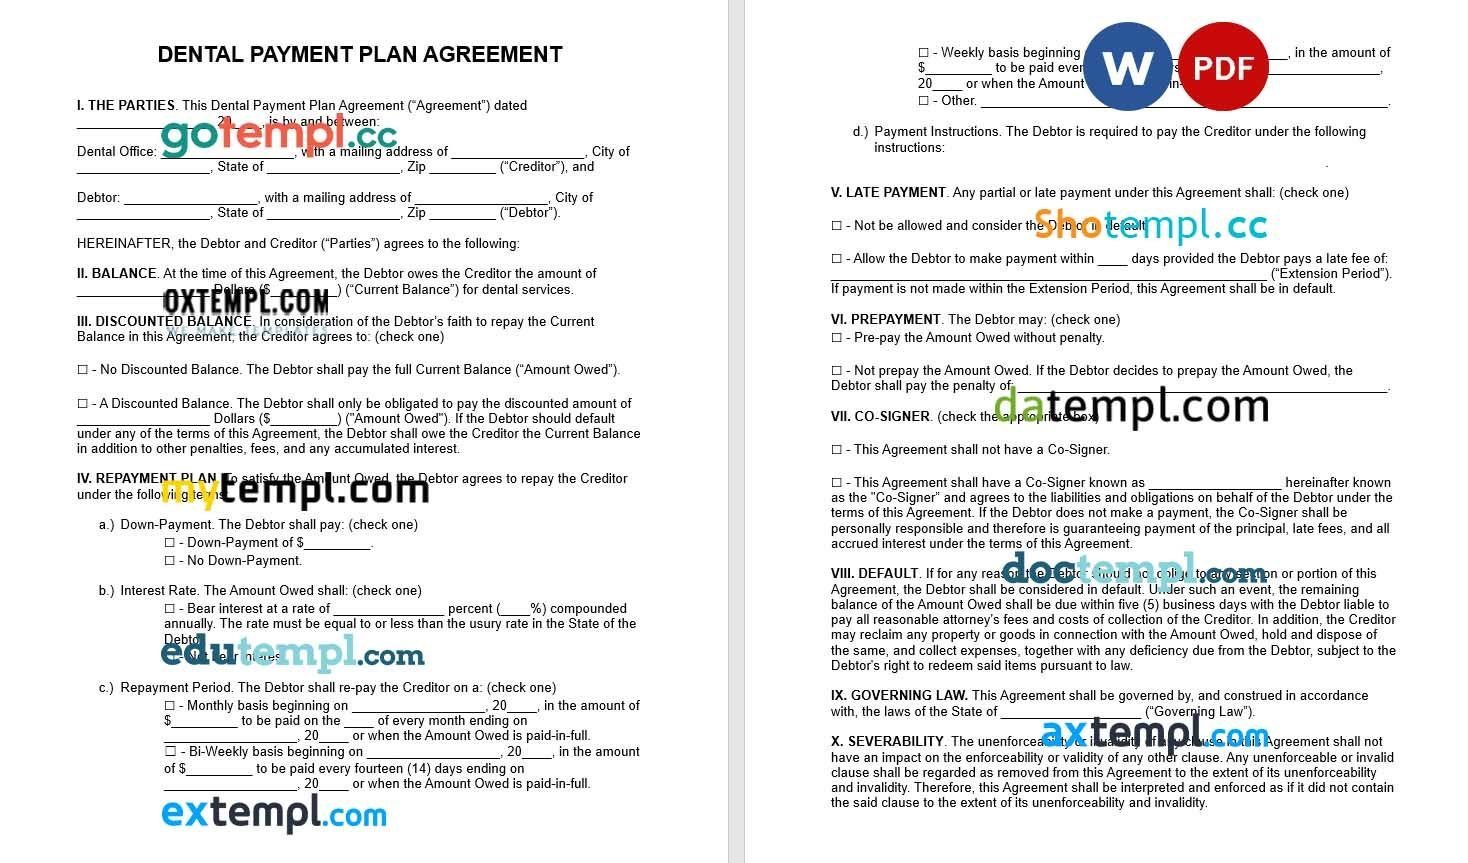 Dental Payment Plan Agreement Word example, fully editable